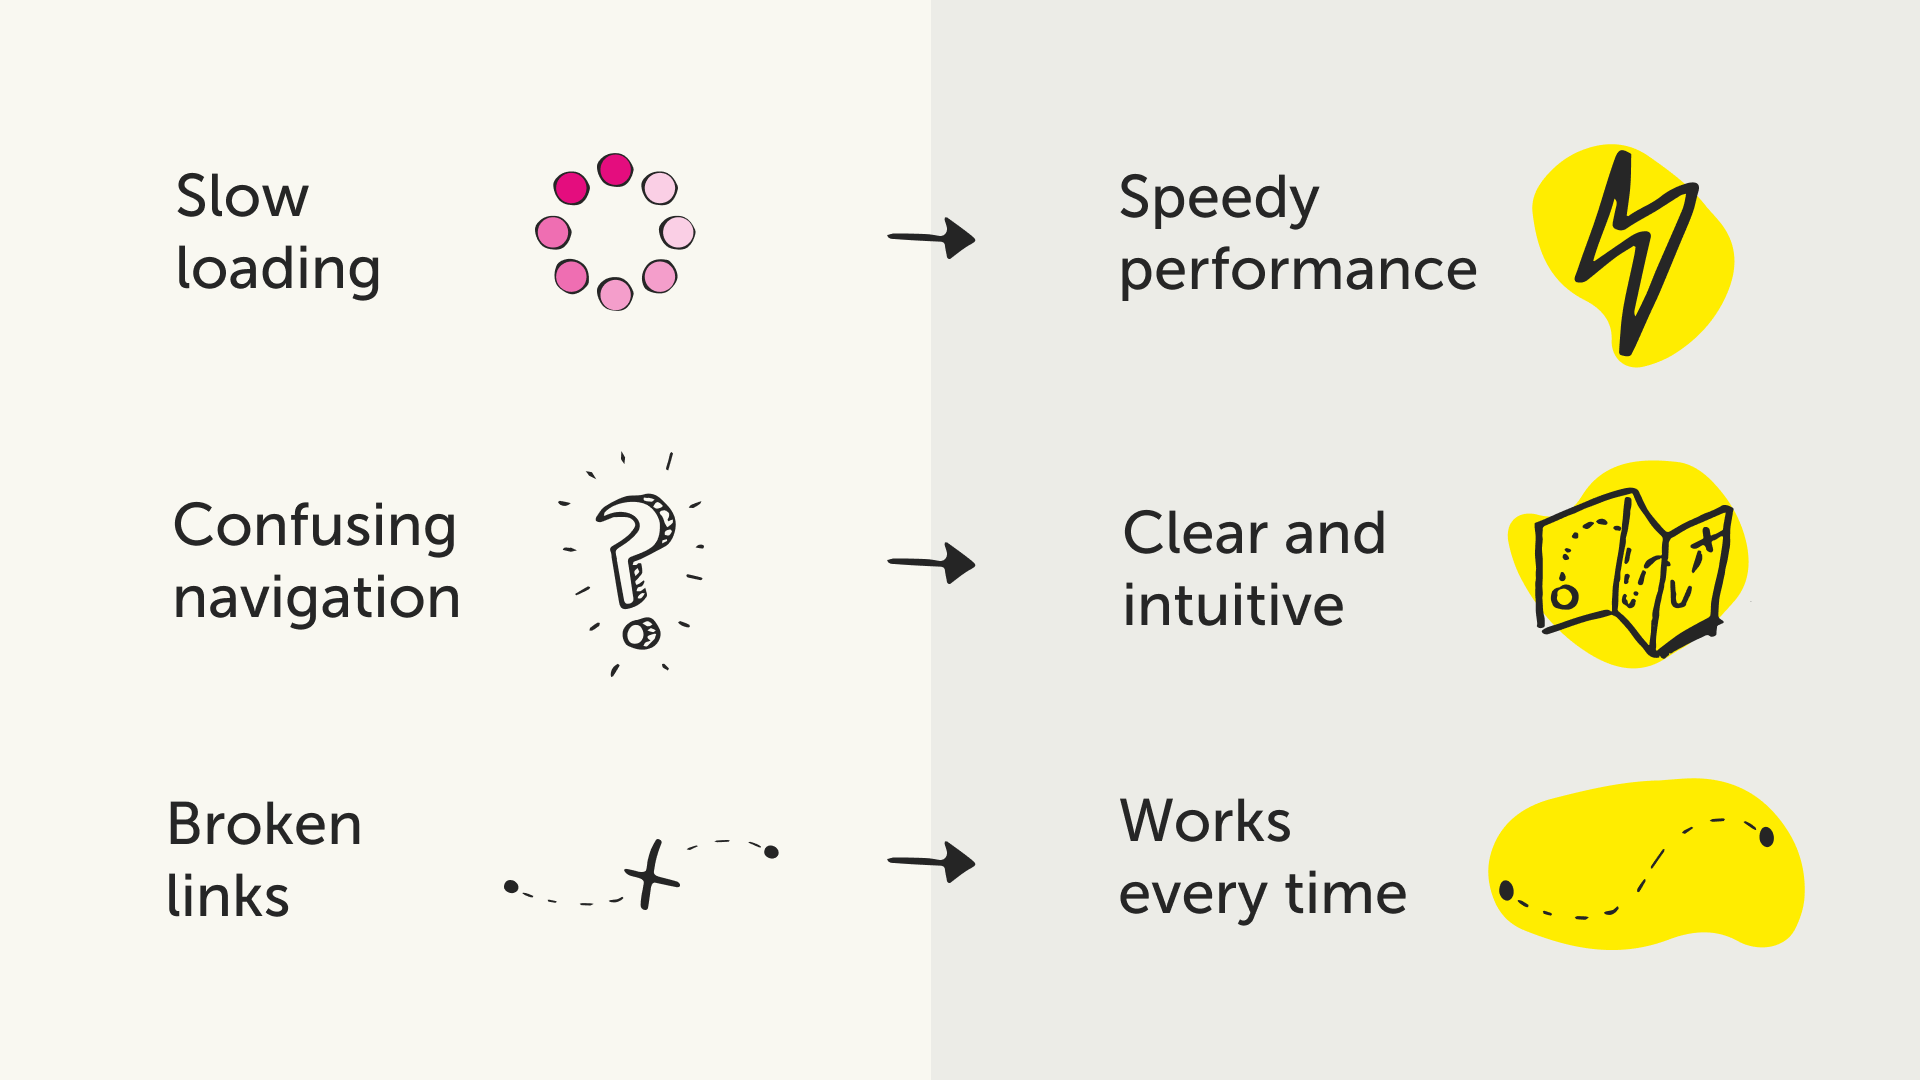 The image presents a comparison between common web usability issues and their positive counterparts in a visually straightforward manner. On the left side: "Slow loading" is represented by a circle of pink dots forming a loading icon. "Confusing navigation" is indicated by a question mark surrounded by a few orbiting dots. "Broken links" is symbolized by a broken chain link. Each of these issues is paired with an arrow pointing to the right side of the image, where the solutions are presented in bright yellow bubbles: "Speedy performance" is depicted with a lightning bolt. "Clear and intuitive" is represented by a map with clear markings. "Works every time" is shown with a solid, unbroken link.